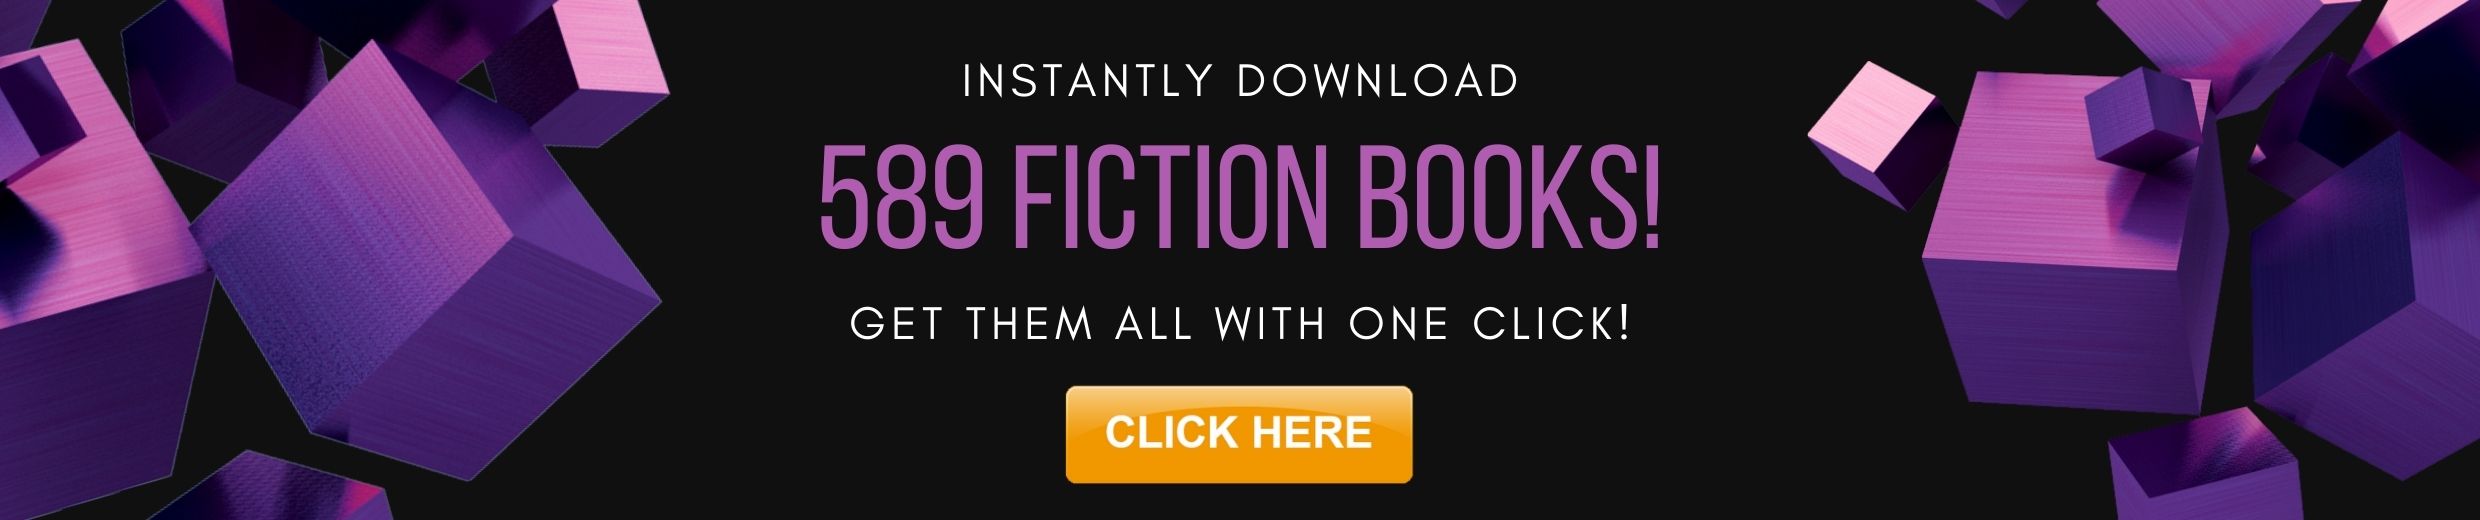 websites to download fiction books for free